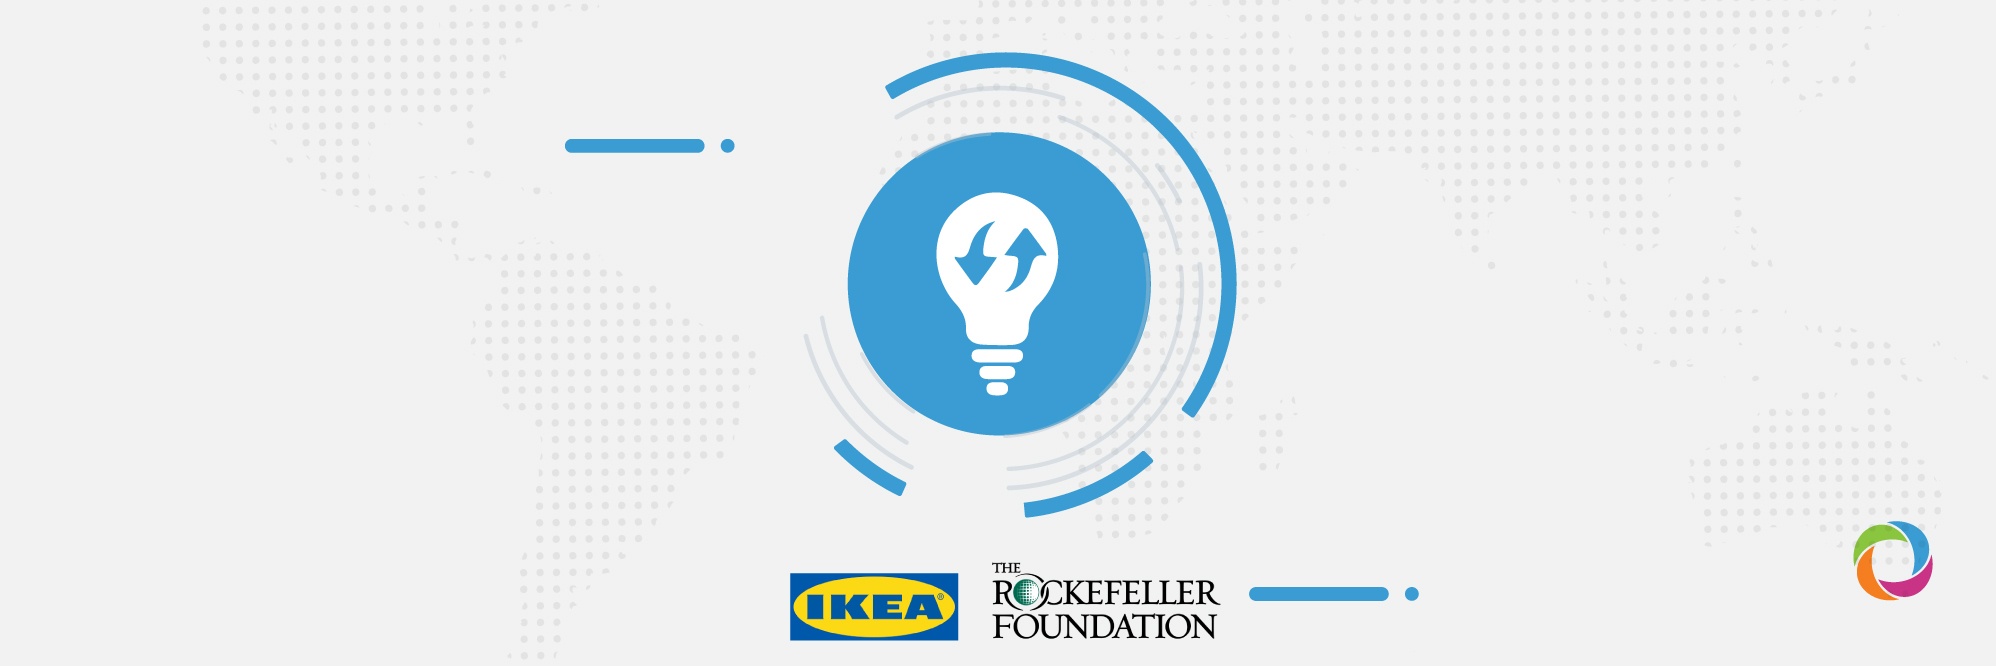 Ikea and Rockefeller Foundations will invest US$1 billion for green energy